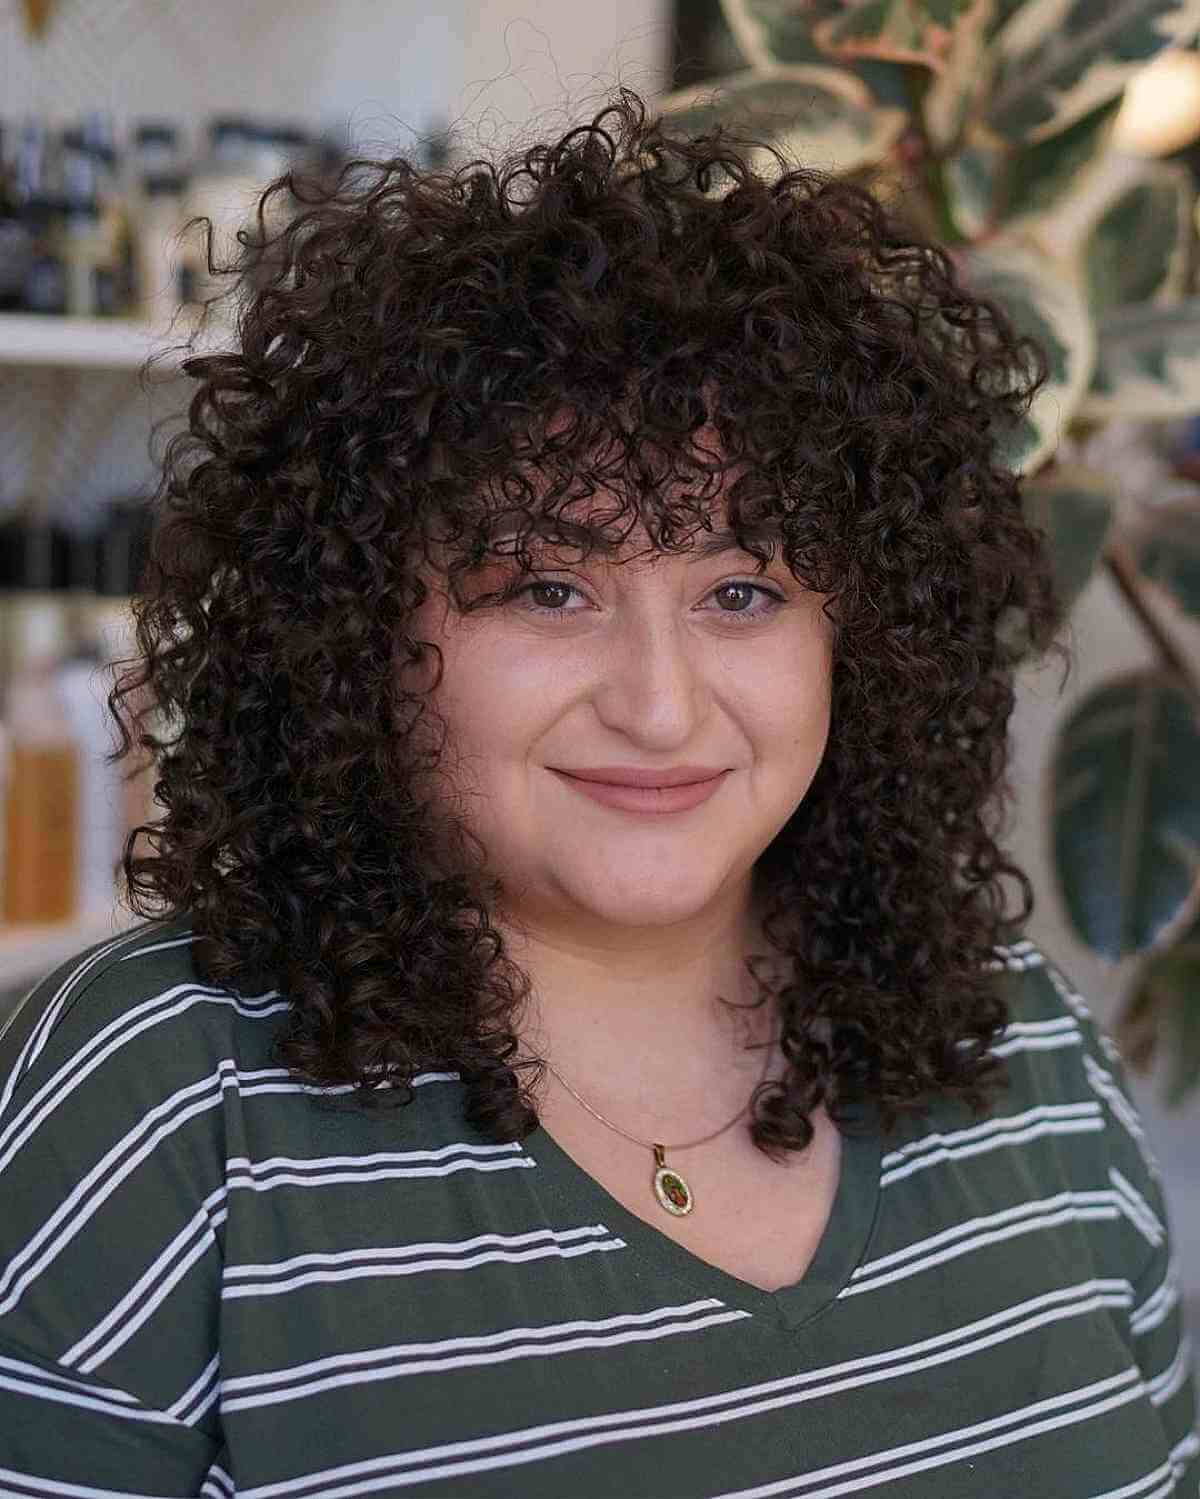 Beautiful curly bangs for curly hair and round face shape